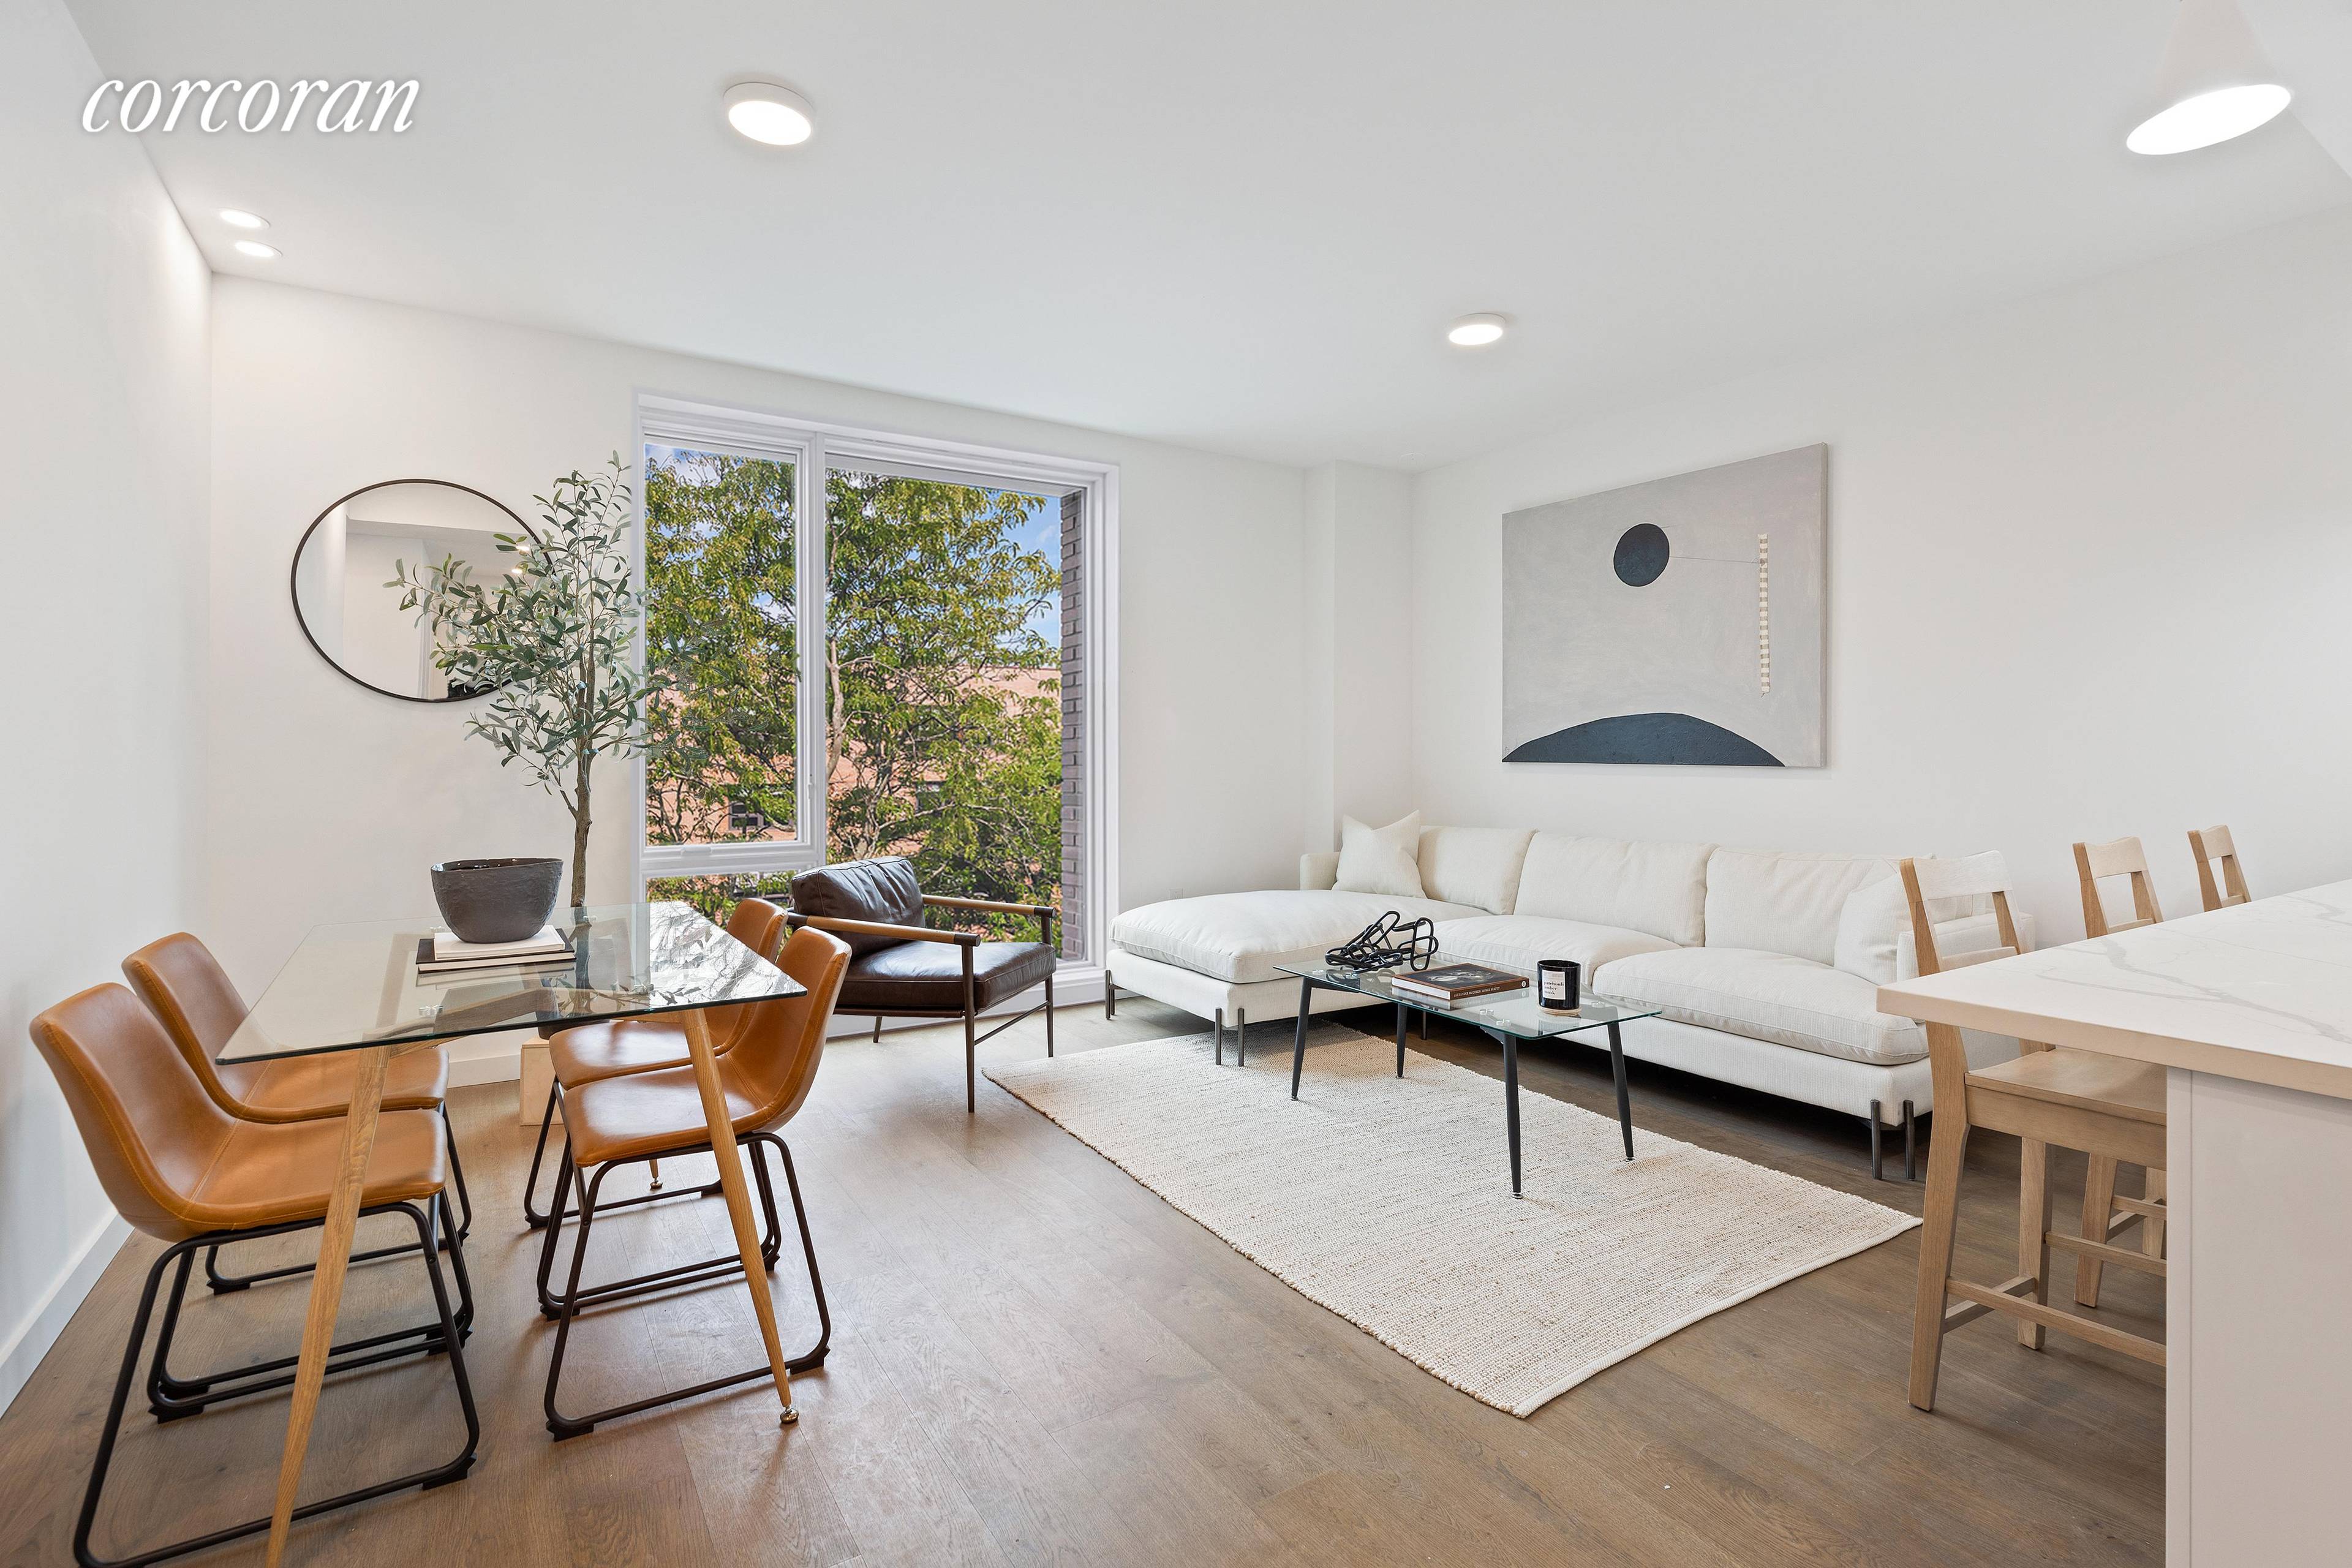 Welcome to 618 Monroe Street, a sophisticated, amenity rich 10 unit condominium located on the northern edge of historic Stuyvesant Heights in BrooklynA s Bedford Stuyvesant neighborhood.